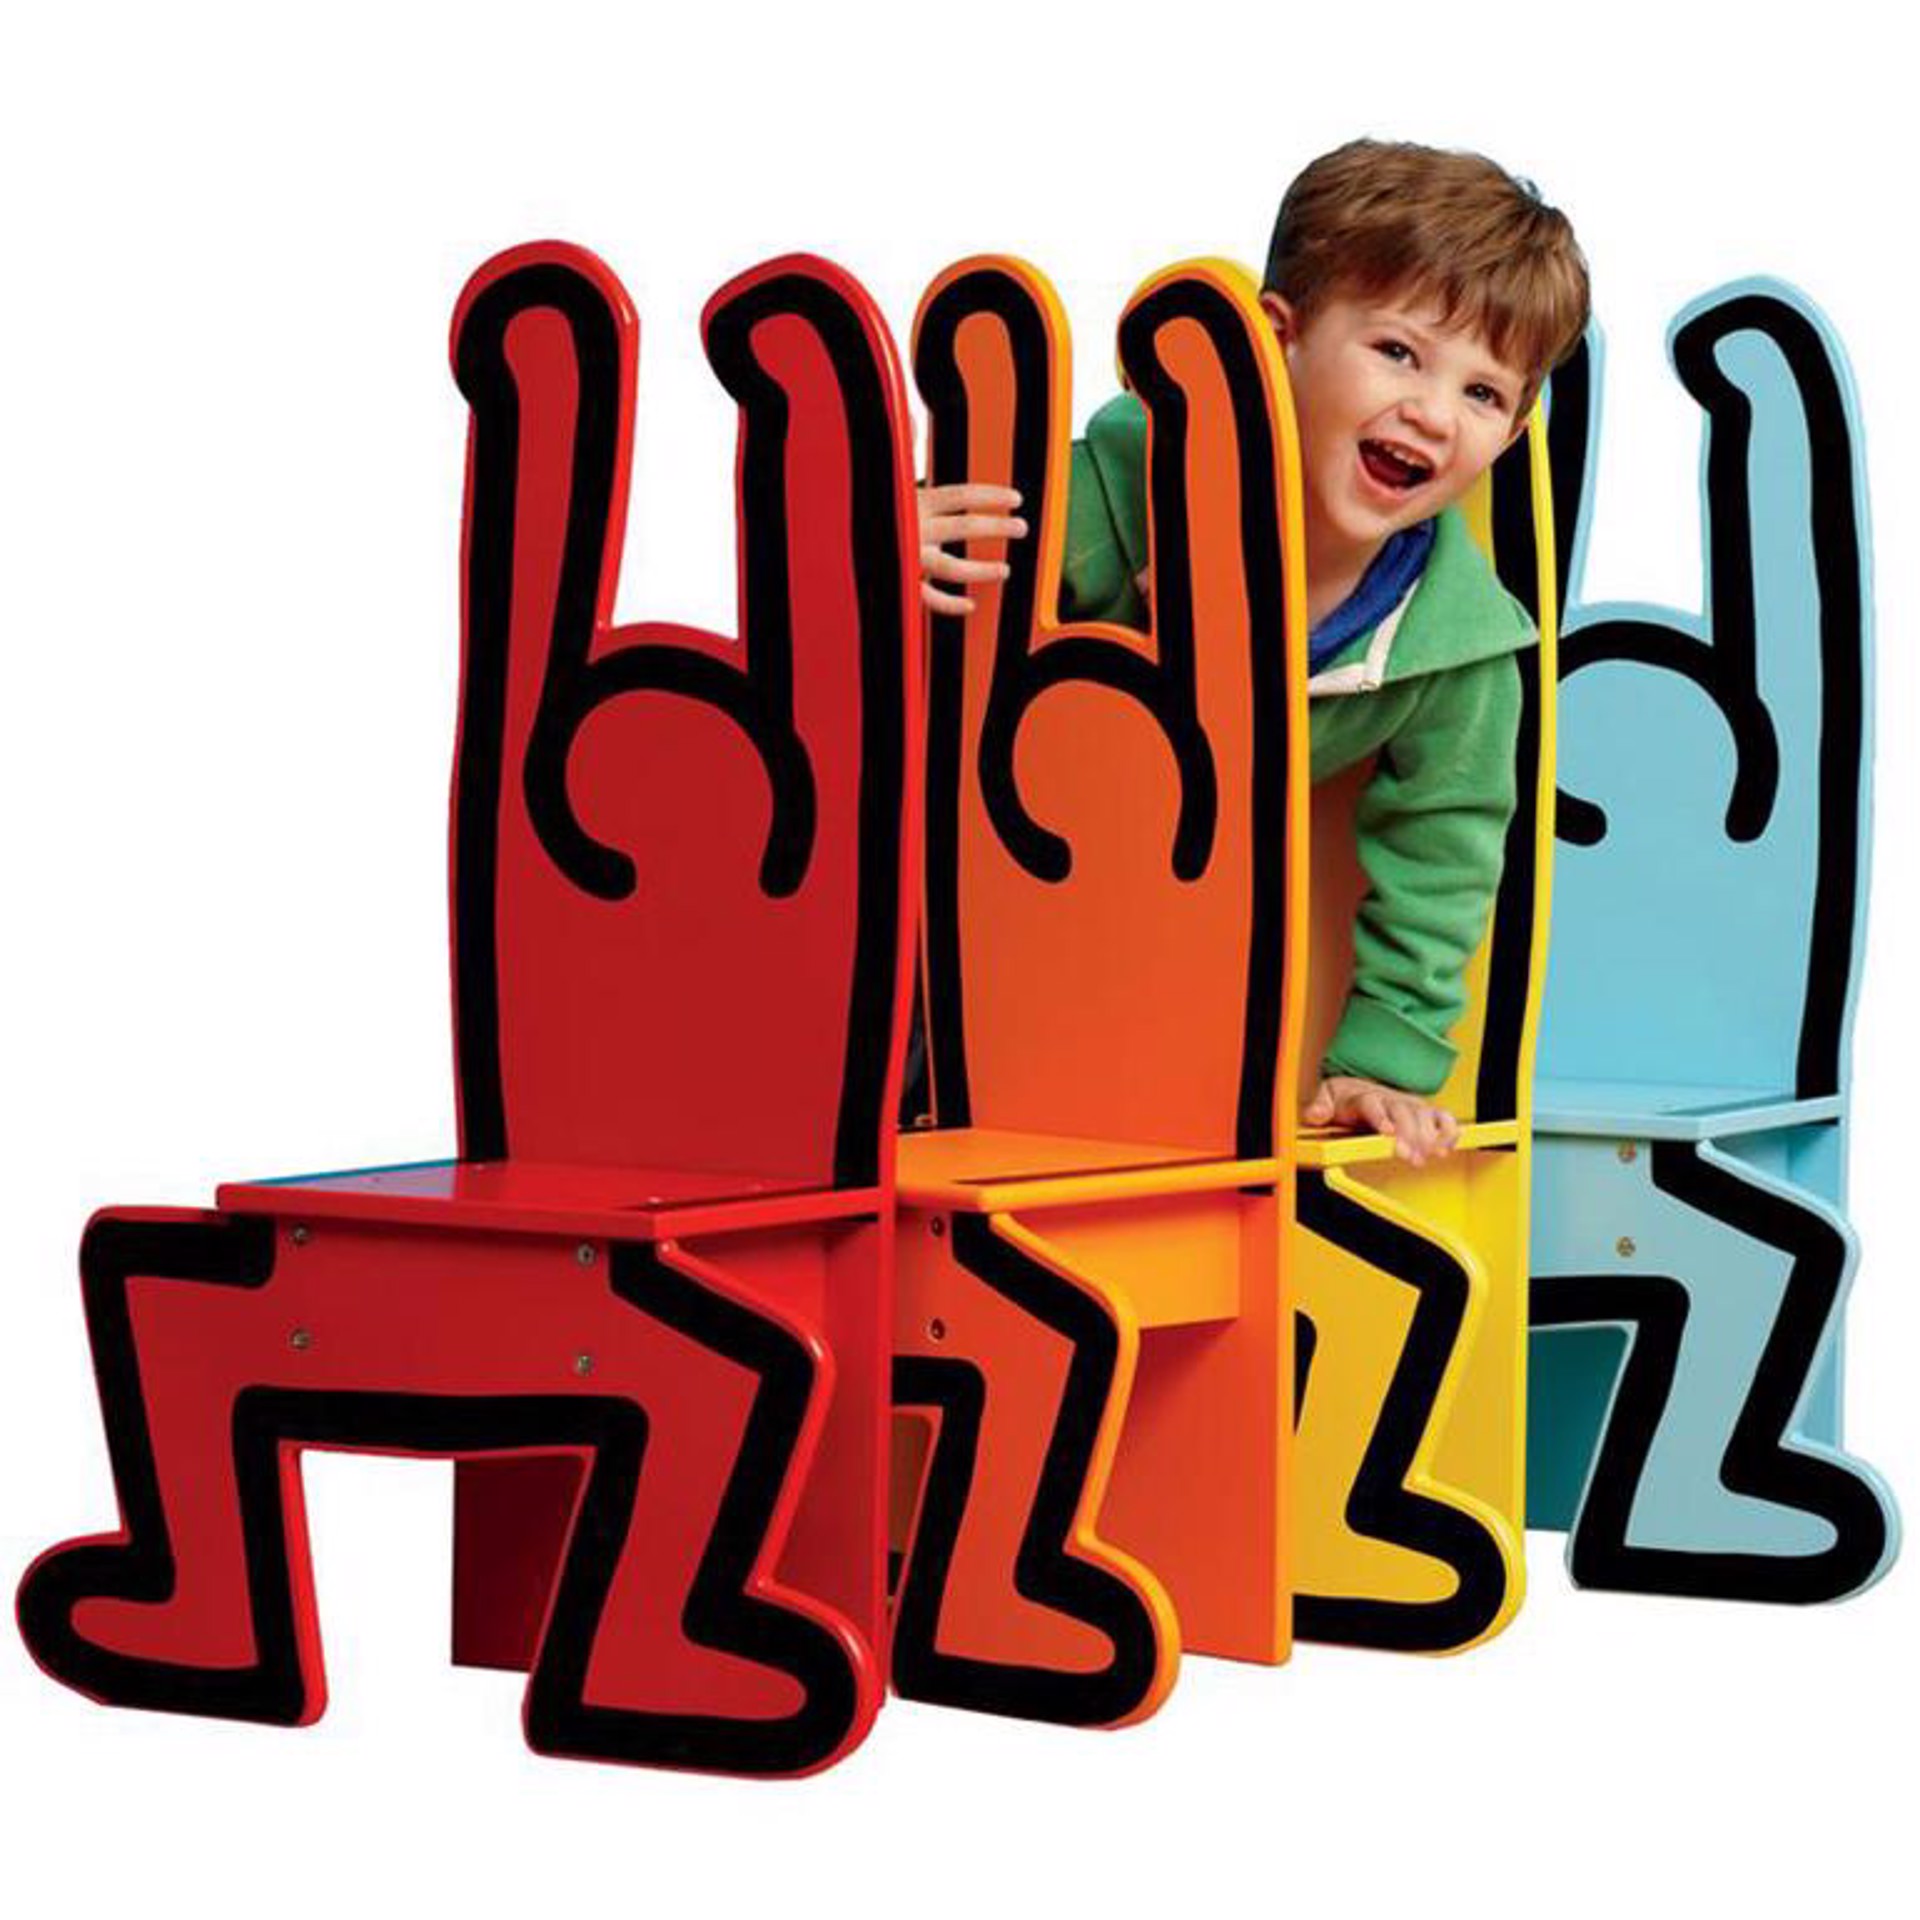 Child's Chair by Keith Haring